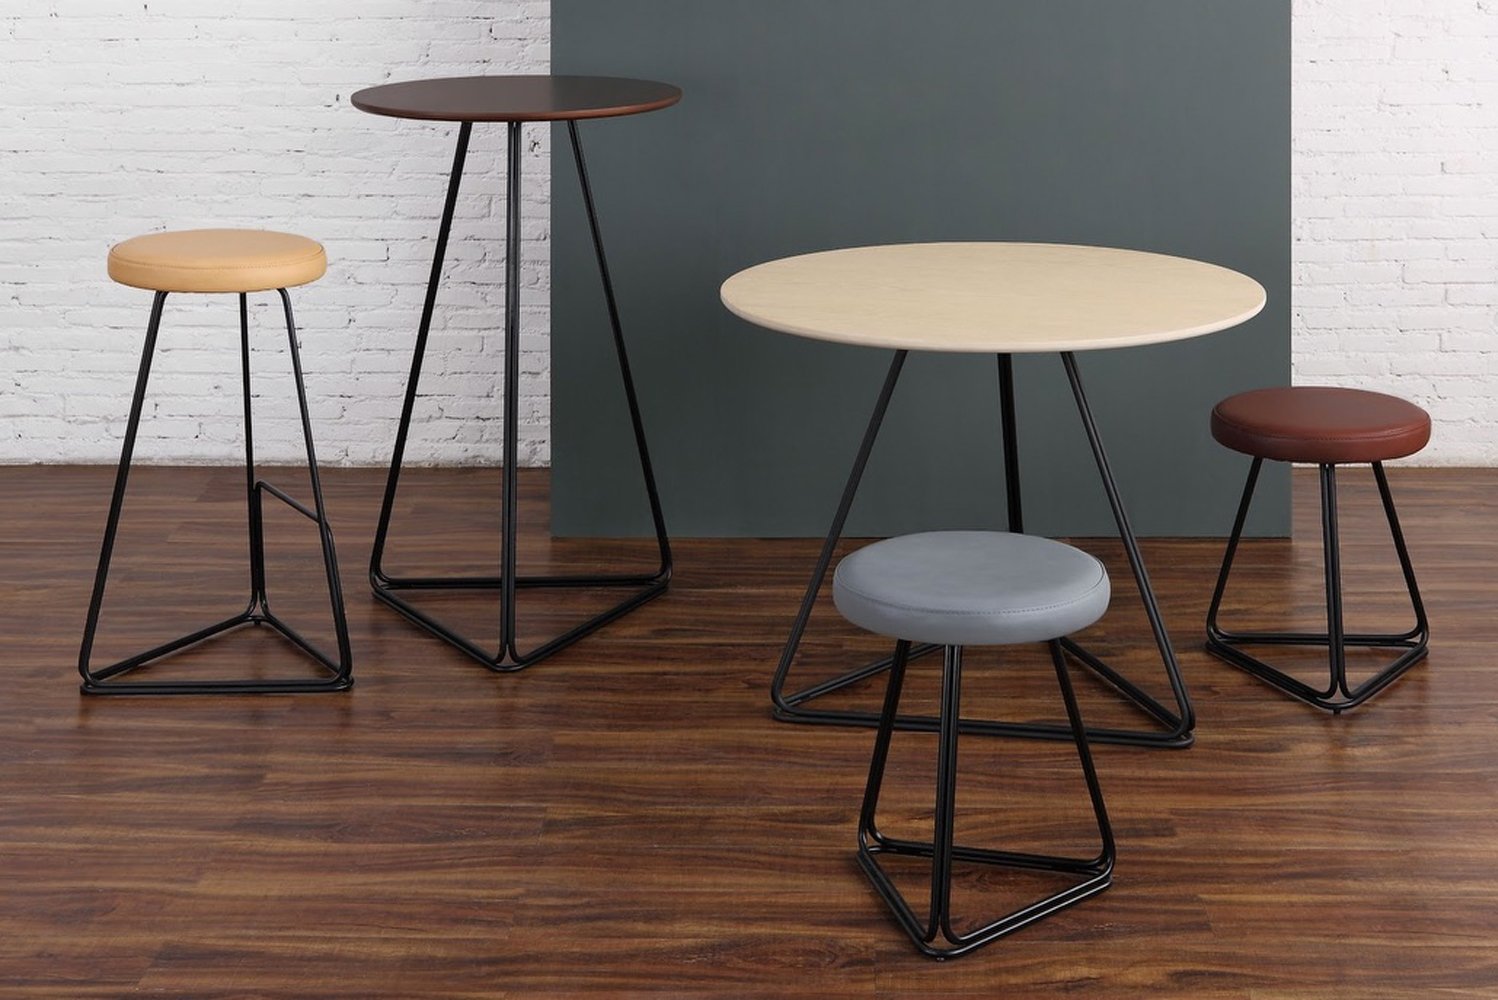 mad furniture design launched the Delta collection of tables and stools with a delta-shaped based 